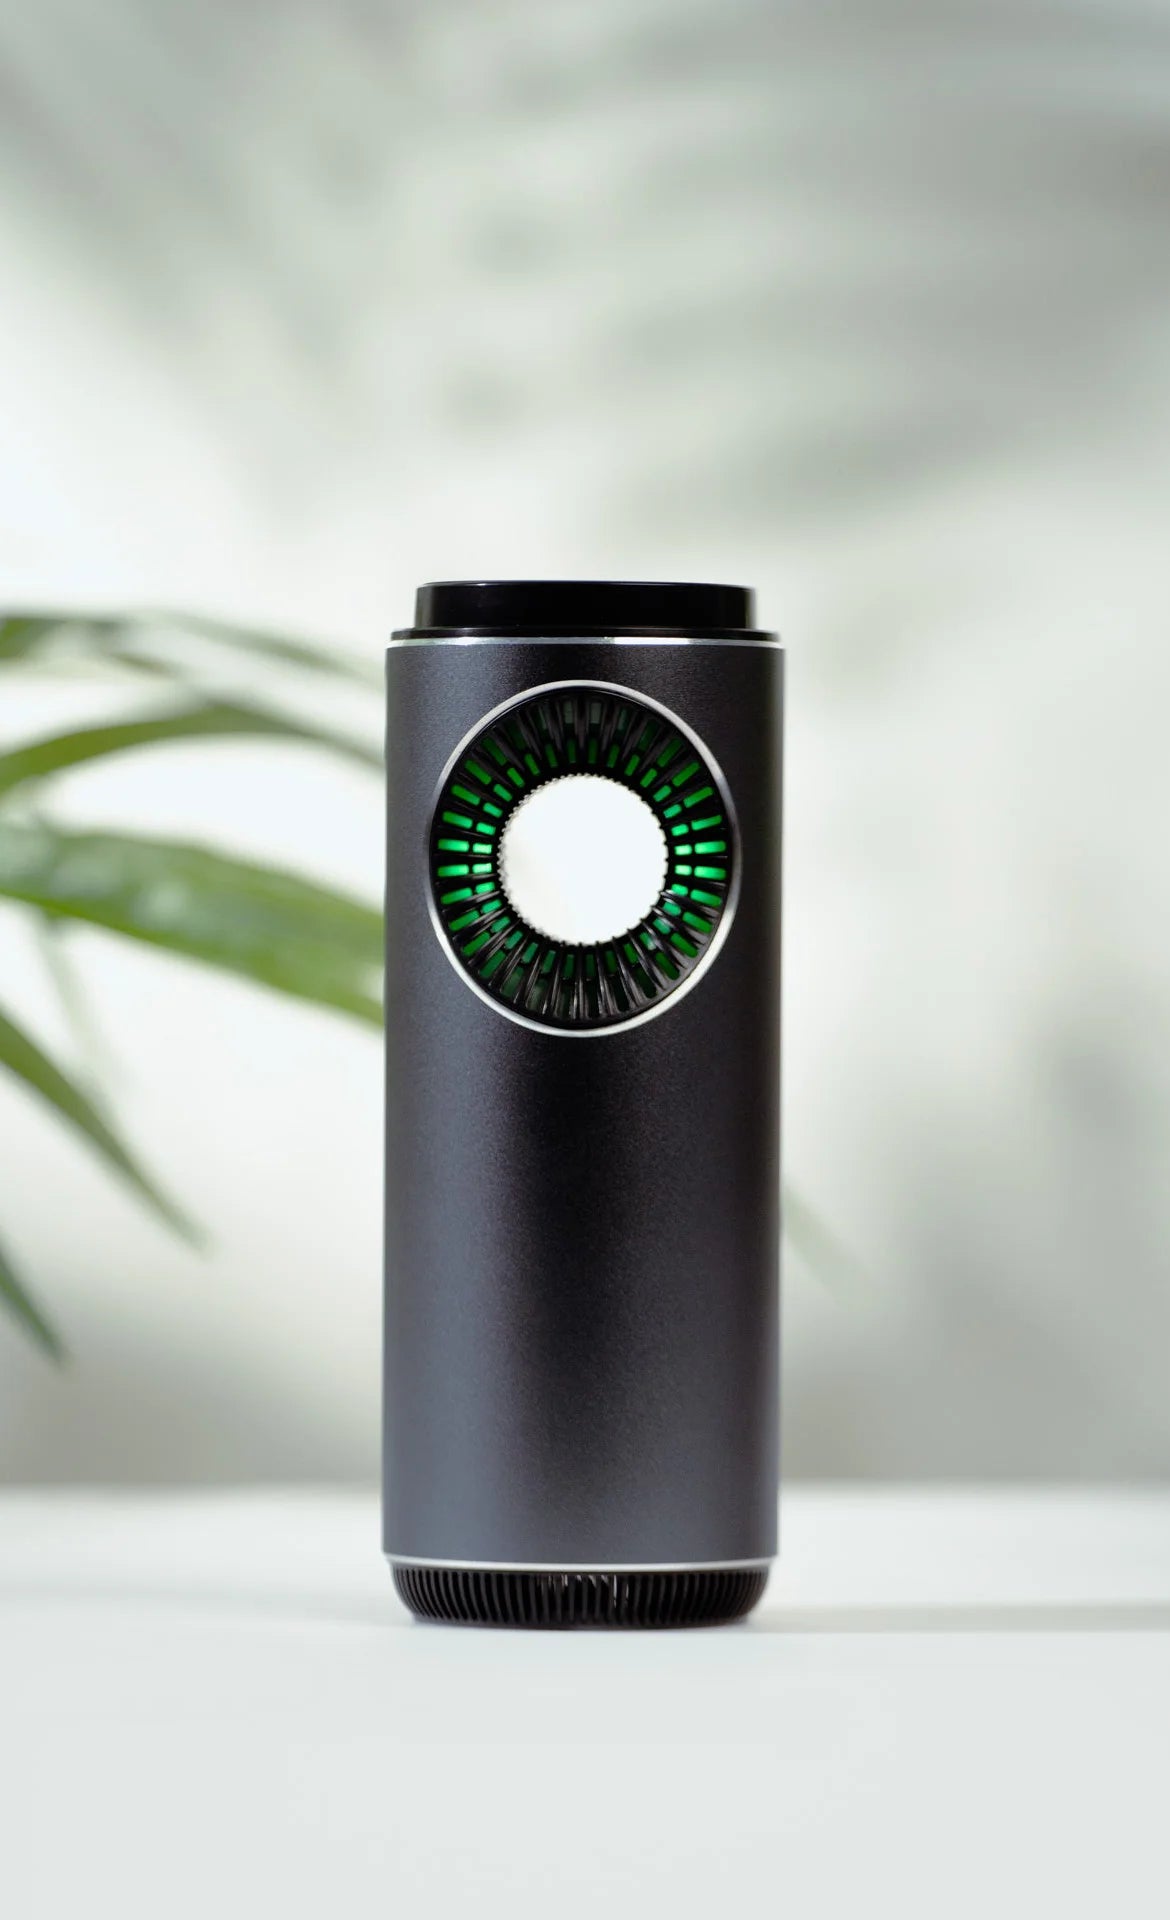 Compact Air Purifier with Green Light